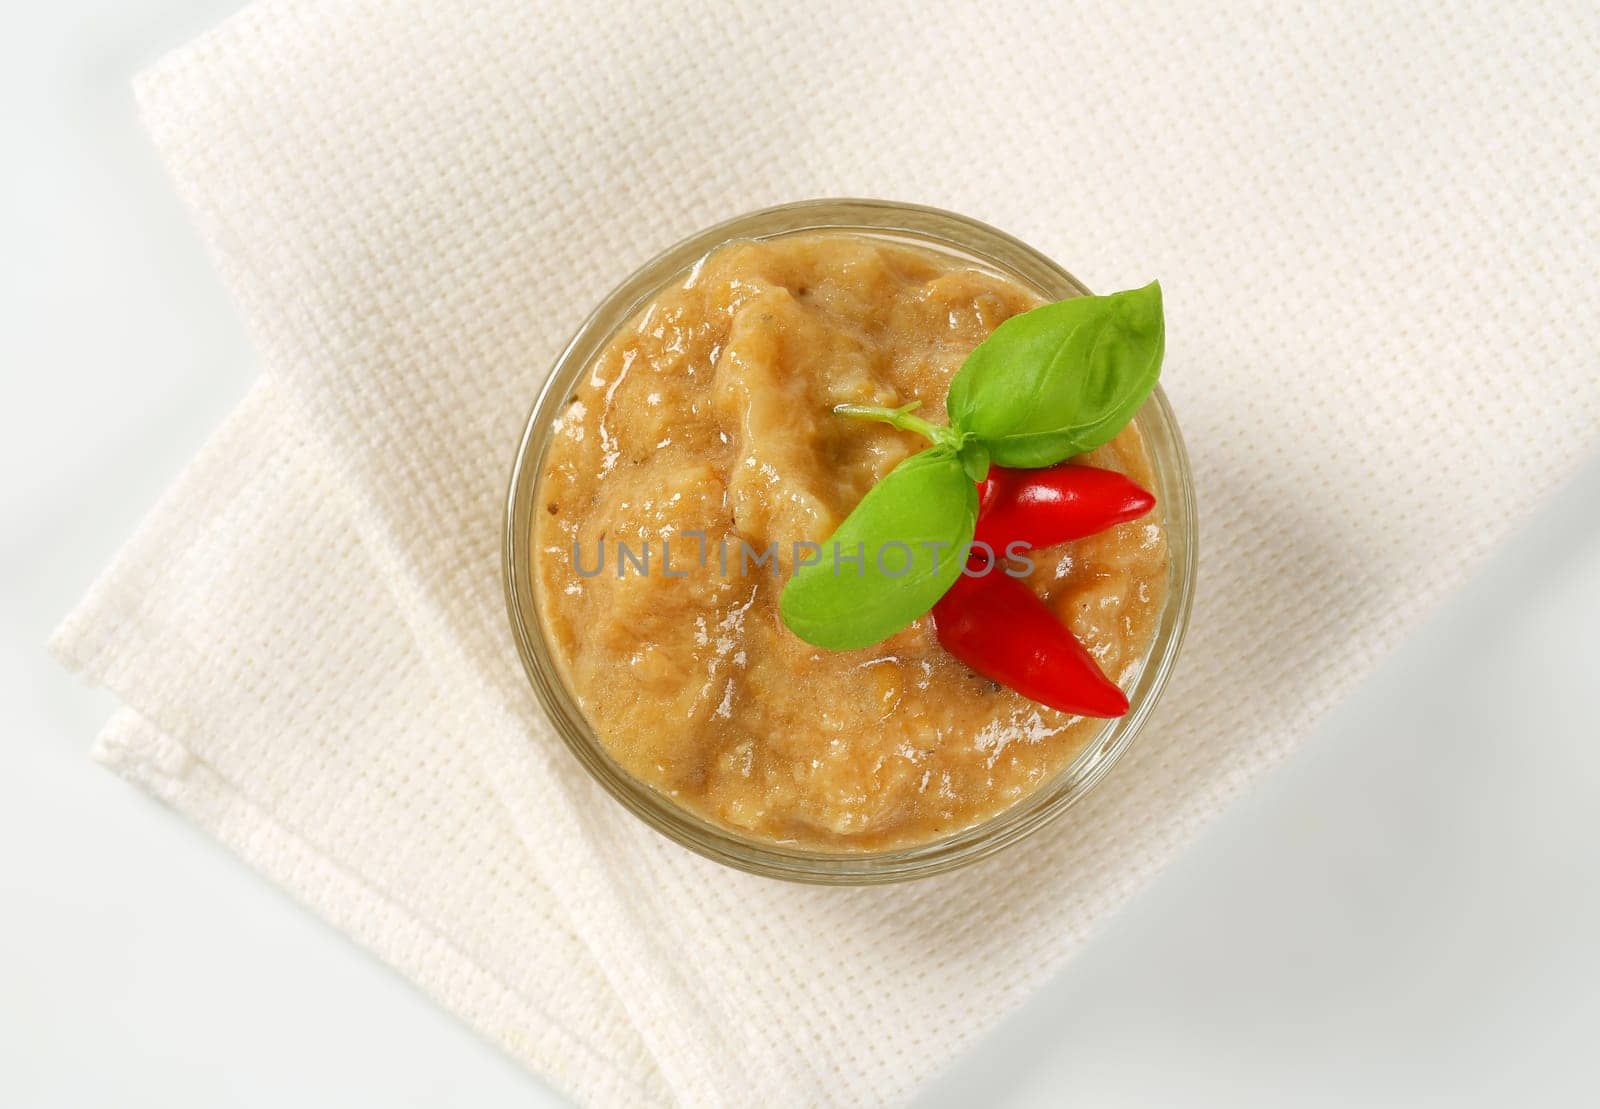 Eggplant dipping sauce or spread by Digifoodstock